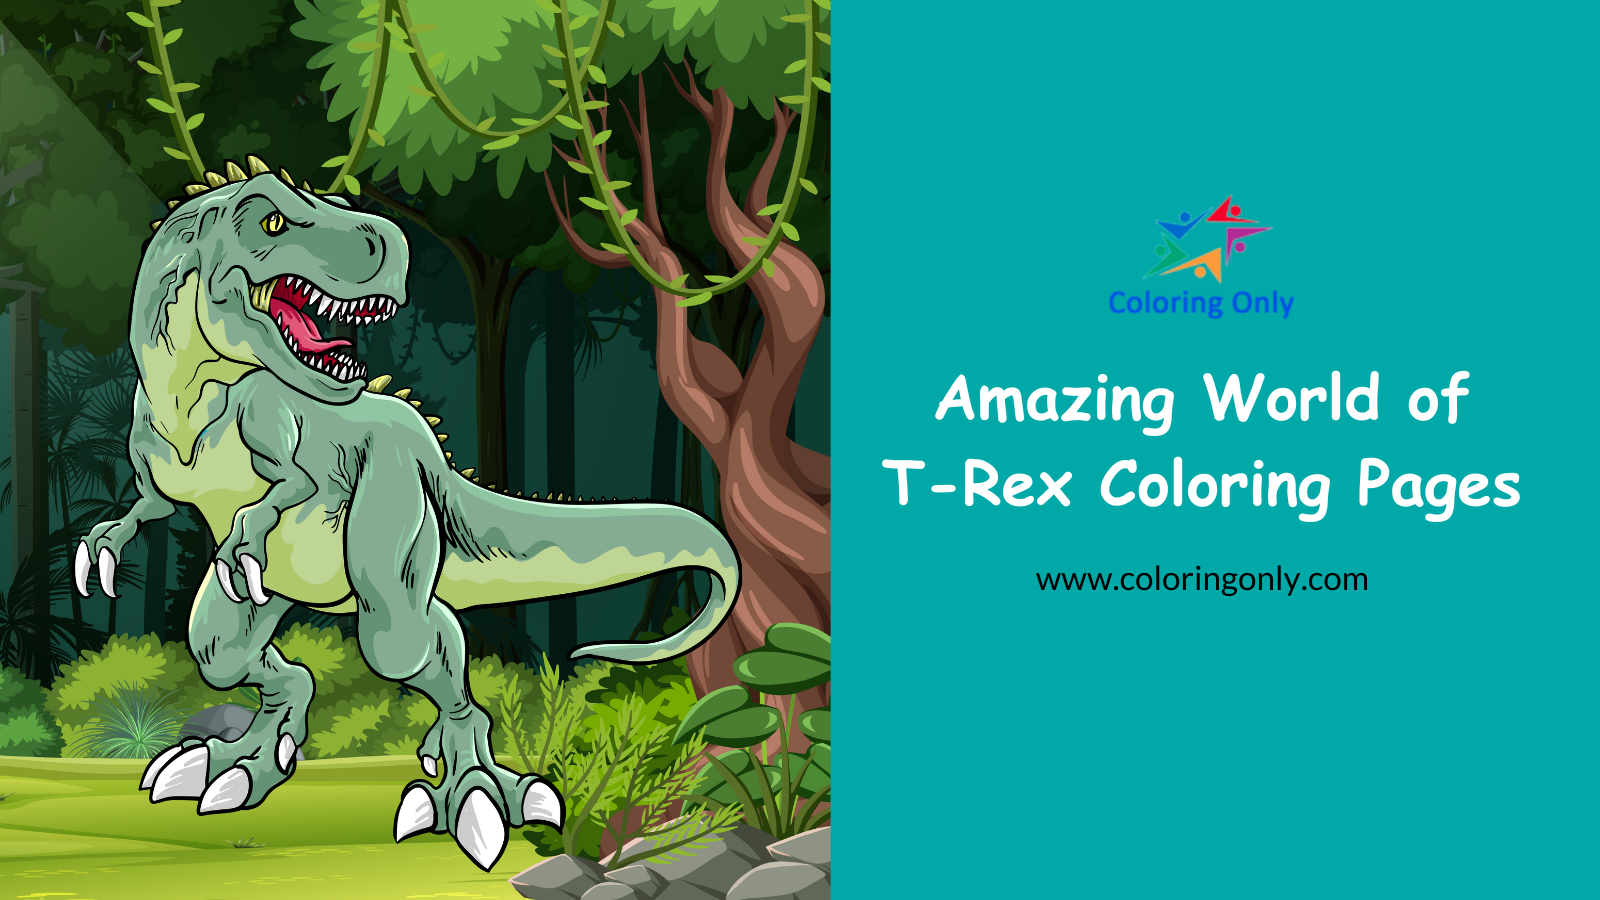 Amazing World of T-Rex Coloring Pages